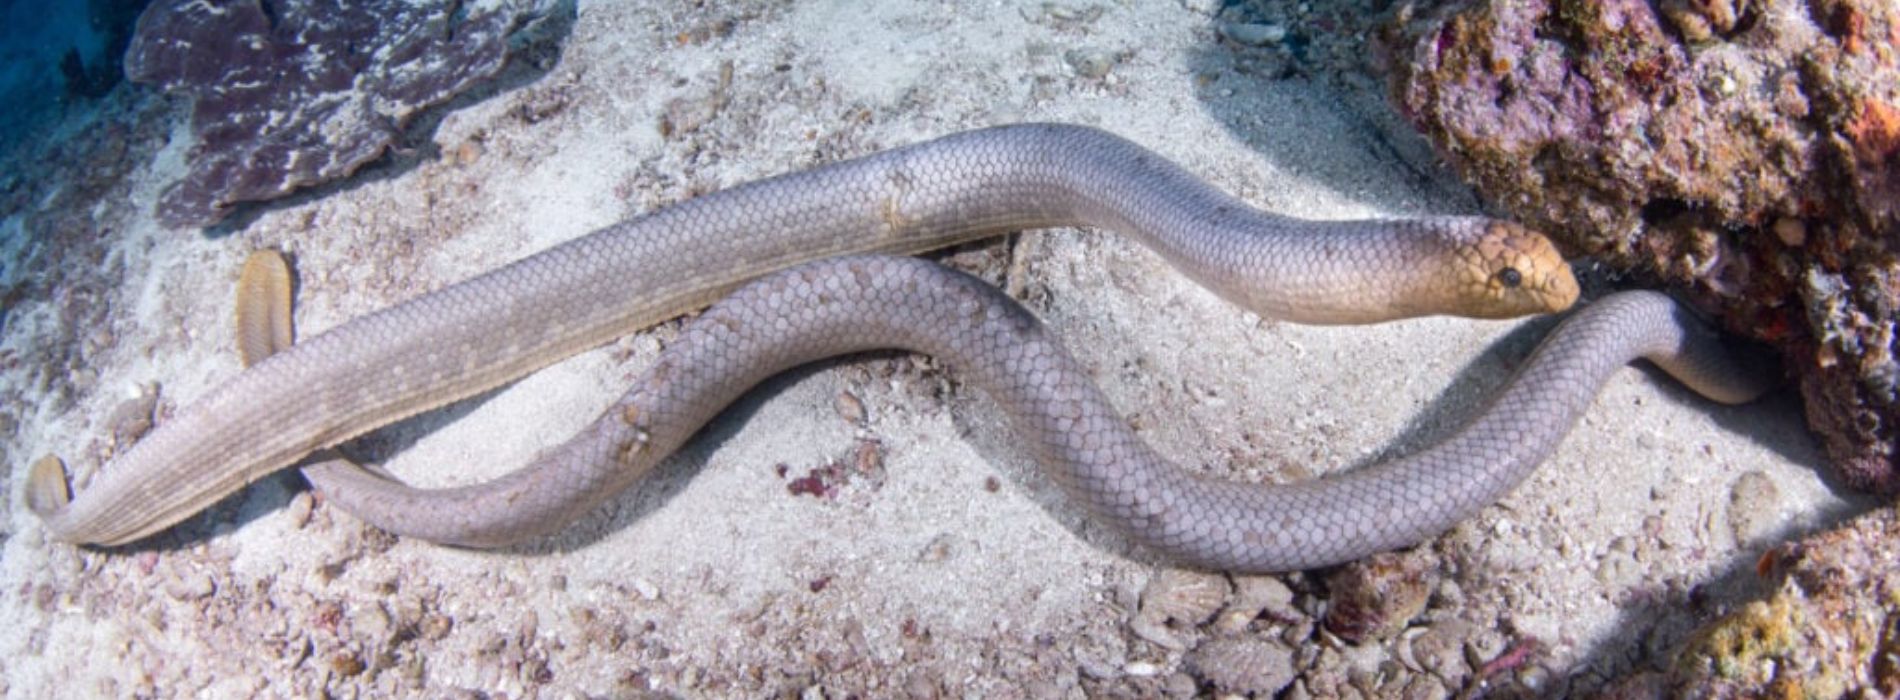 Family-of-olive-sea-snake